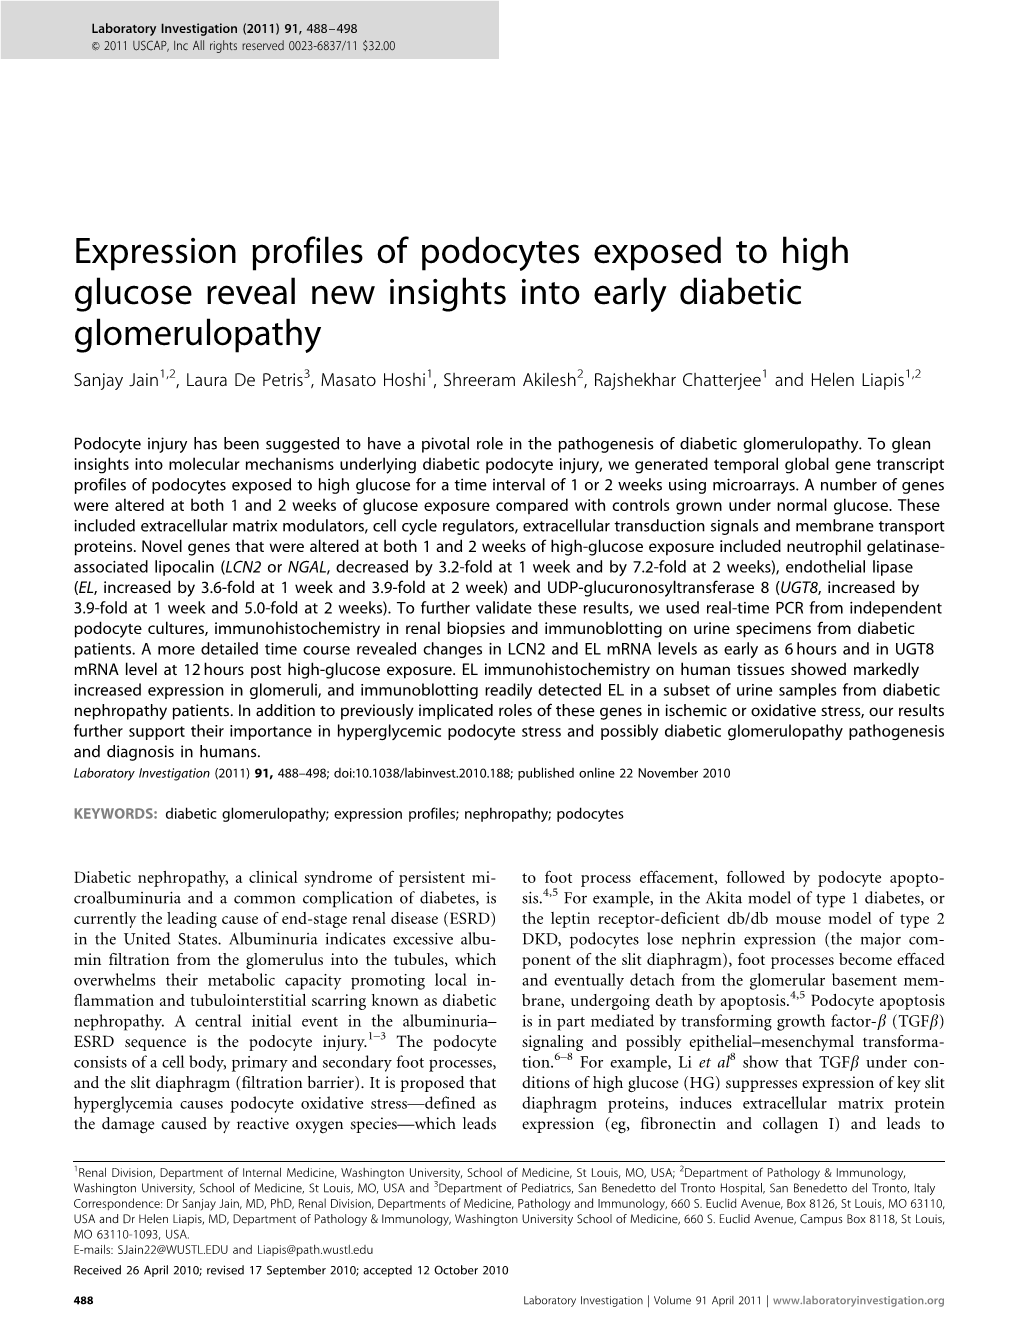 Expression Profiles of Podocytes Exposed to High Glucose Reveal